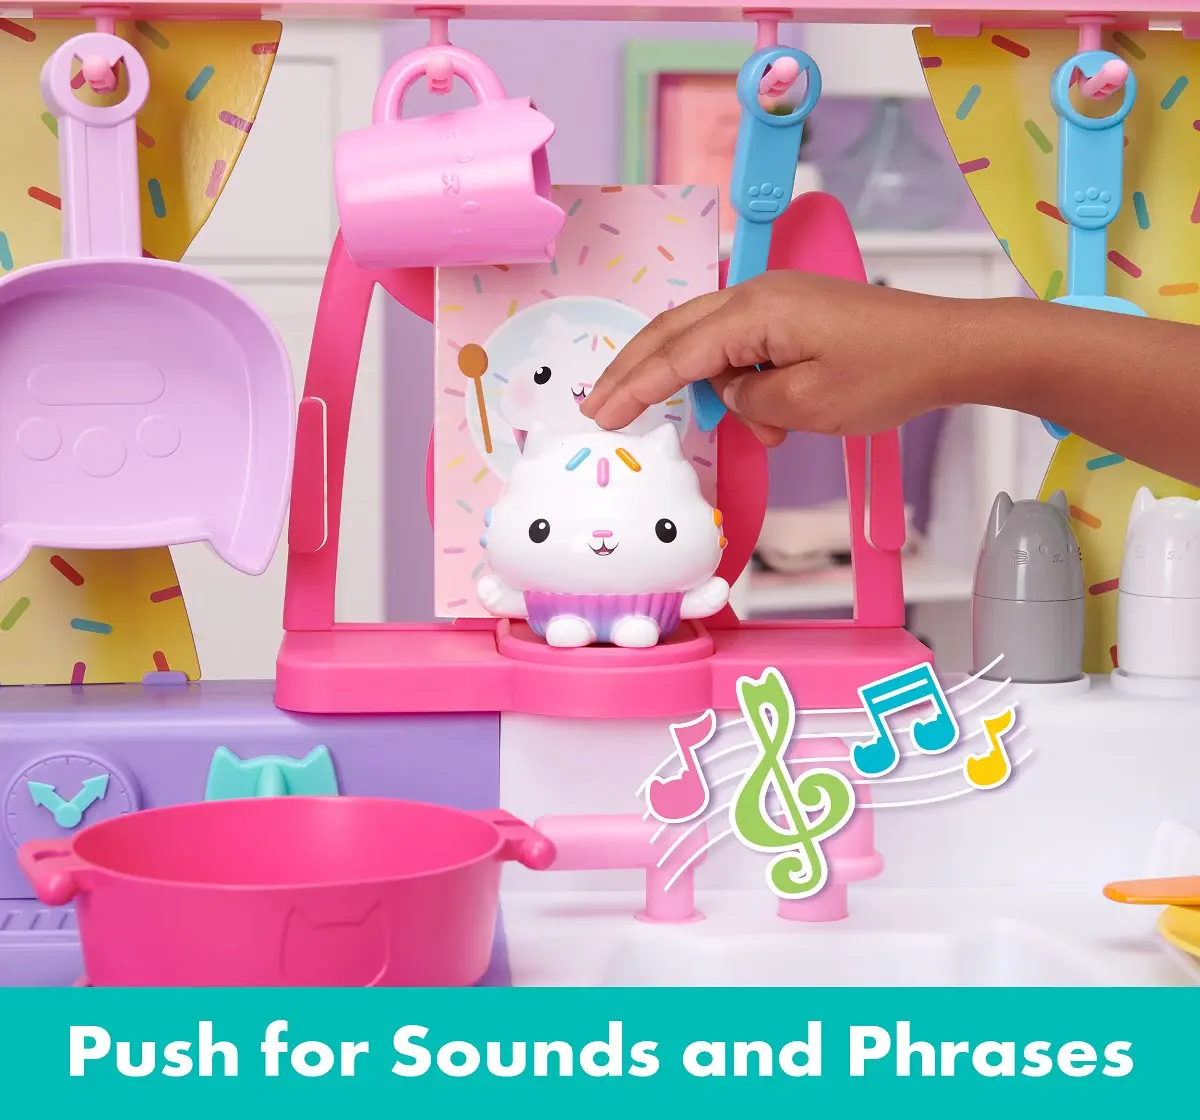 Gabbys Dollhouse, Cakey Kitchen Set for Kids with Play Kitchen Accessories, Play Food, Sounds, Music and Kids Toys for Girls and Boys Ages 3 and up